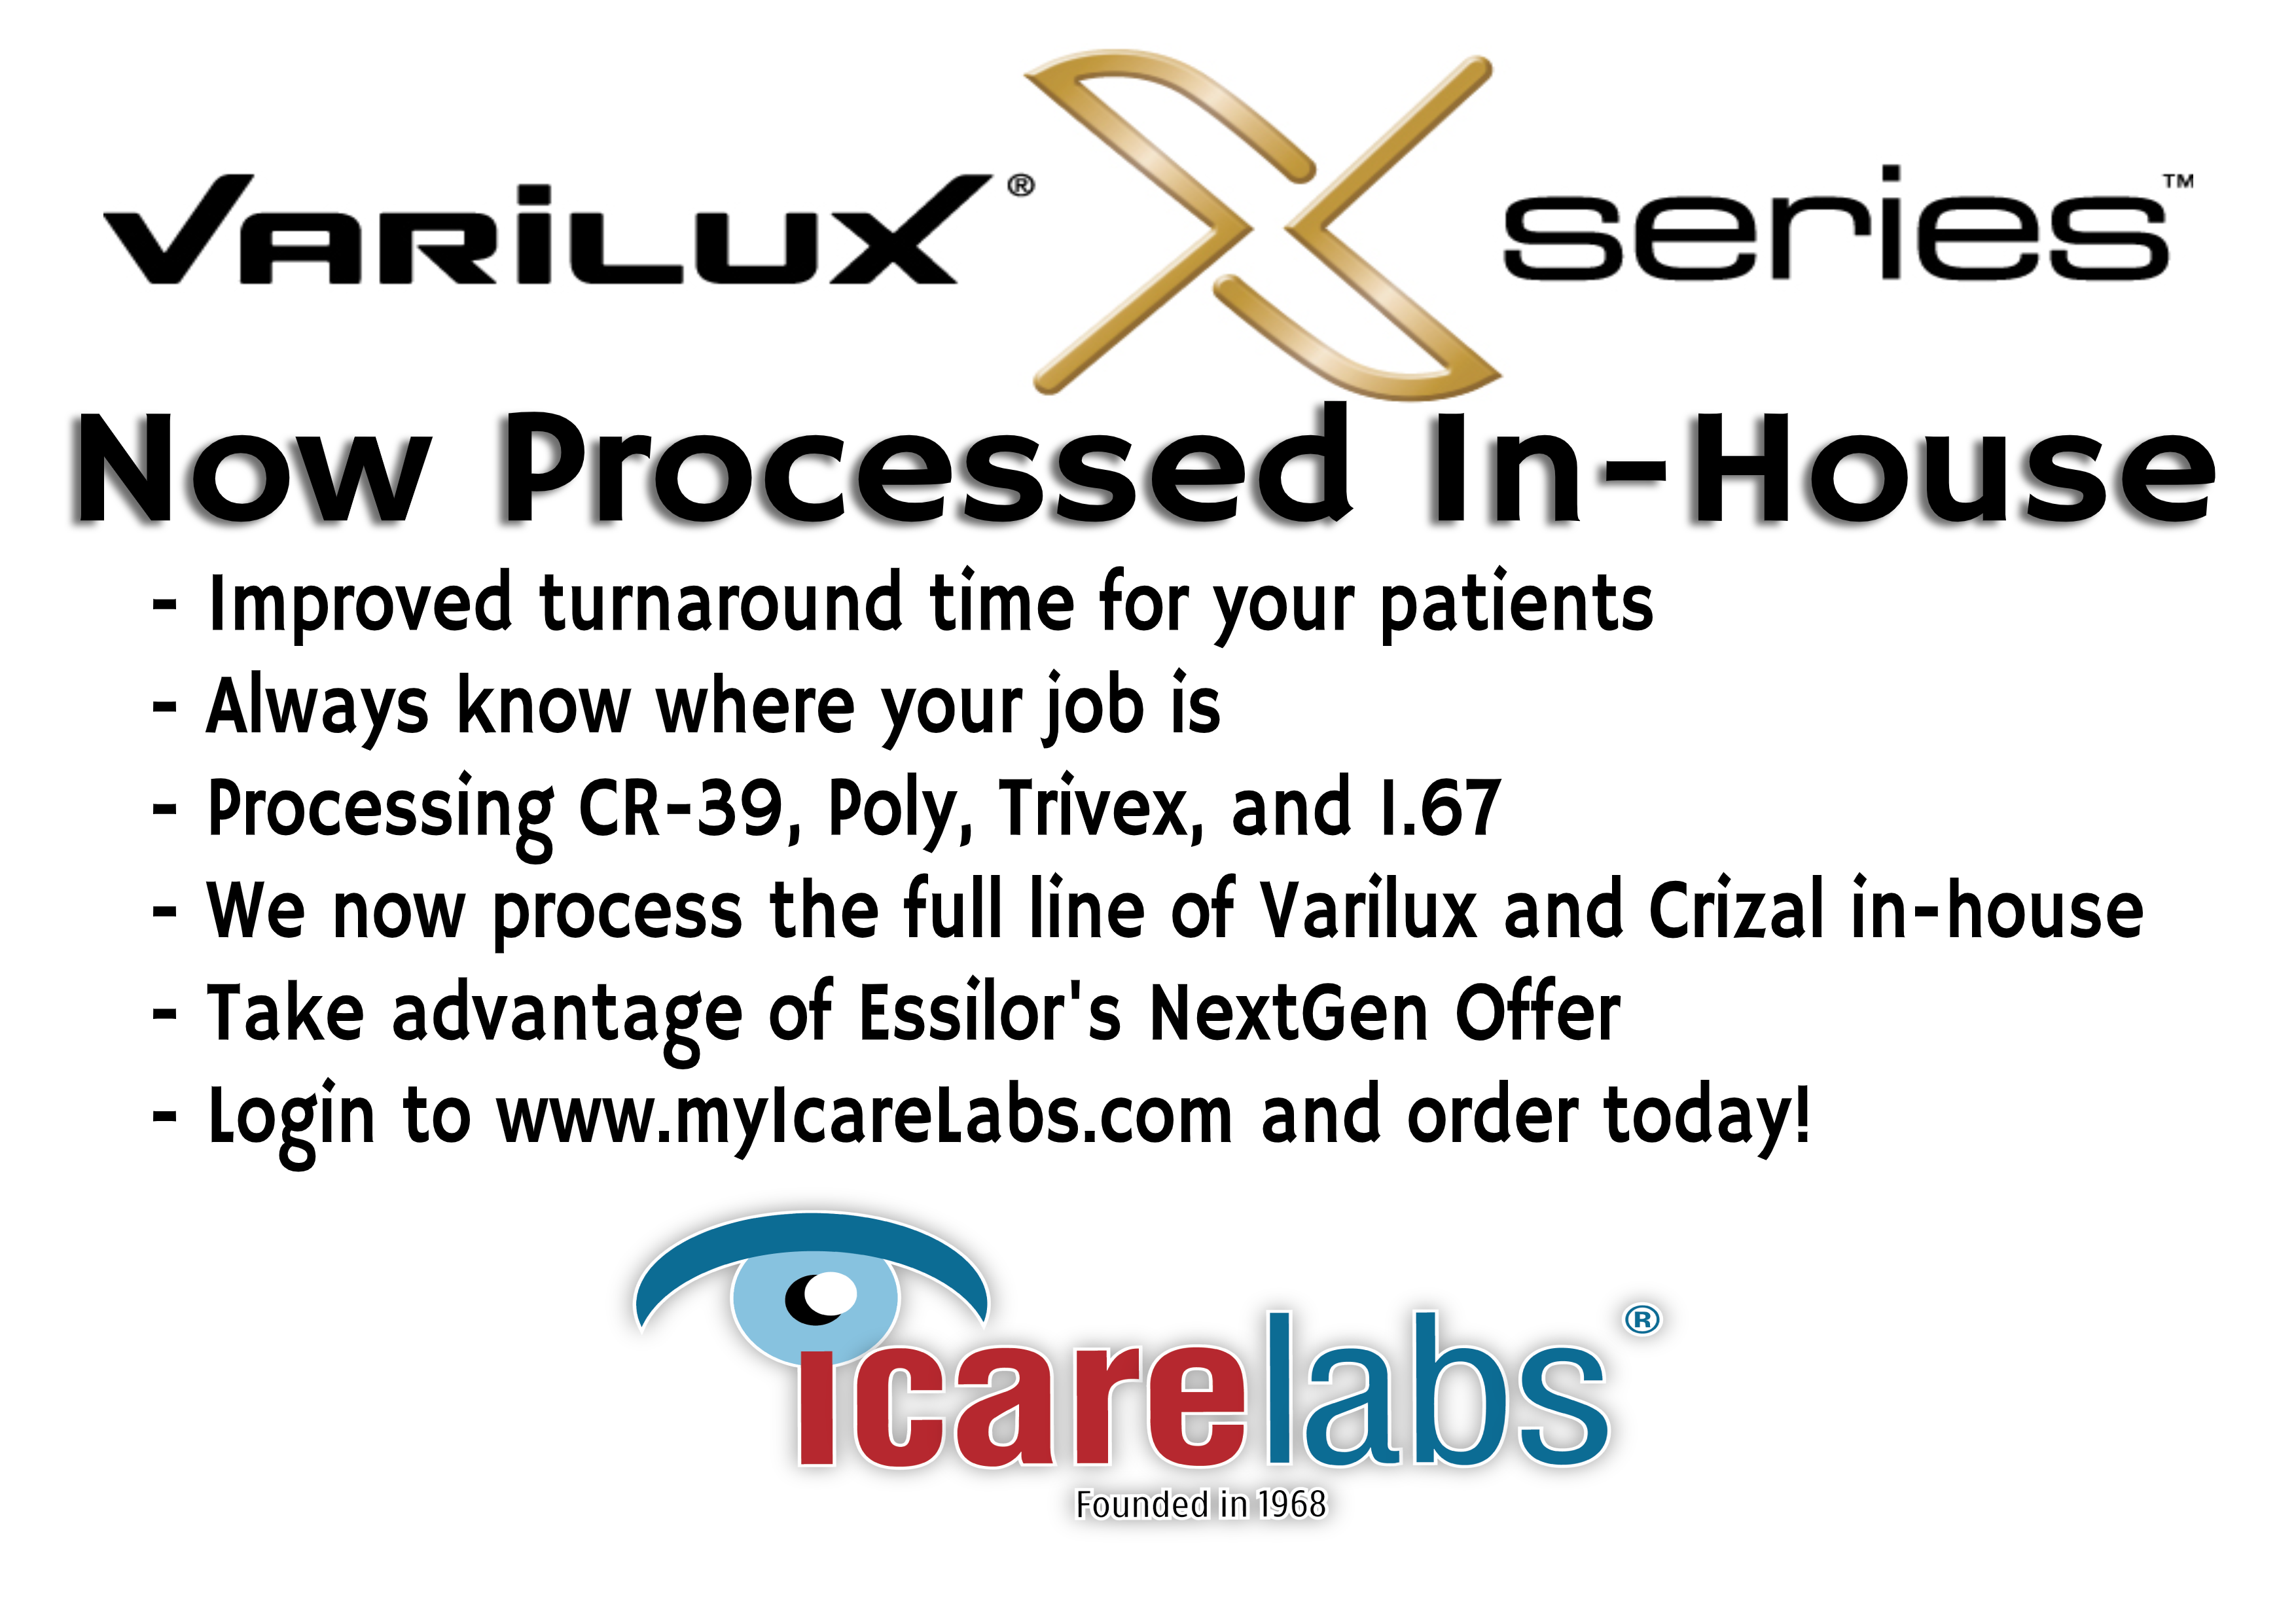 Varilux X Series lenses now processed in-house by IcareLabs